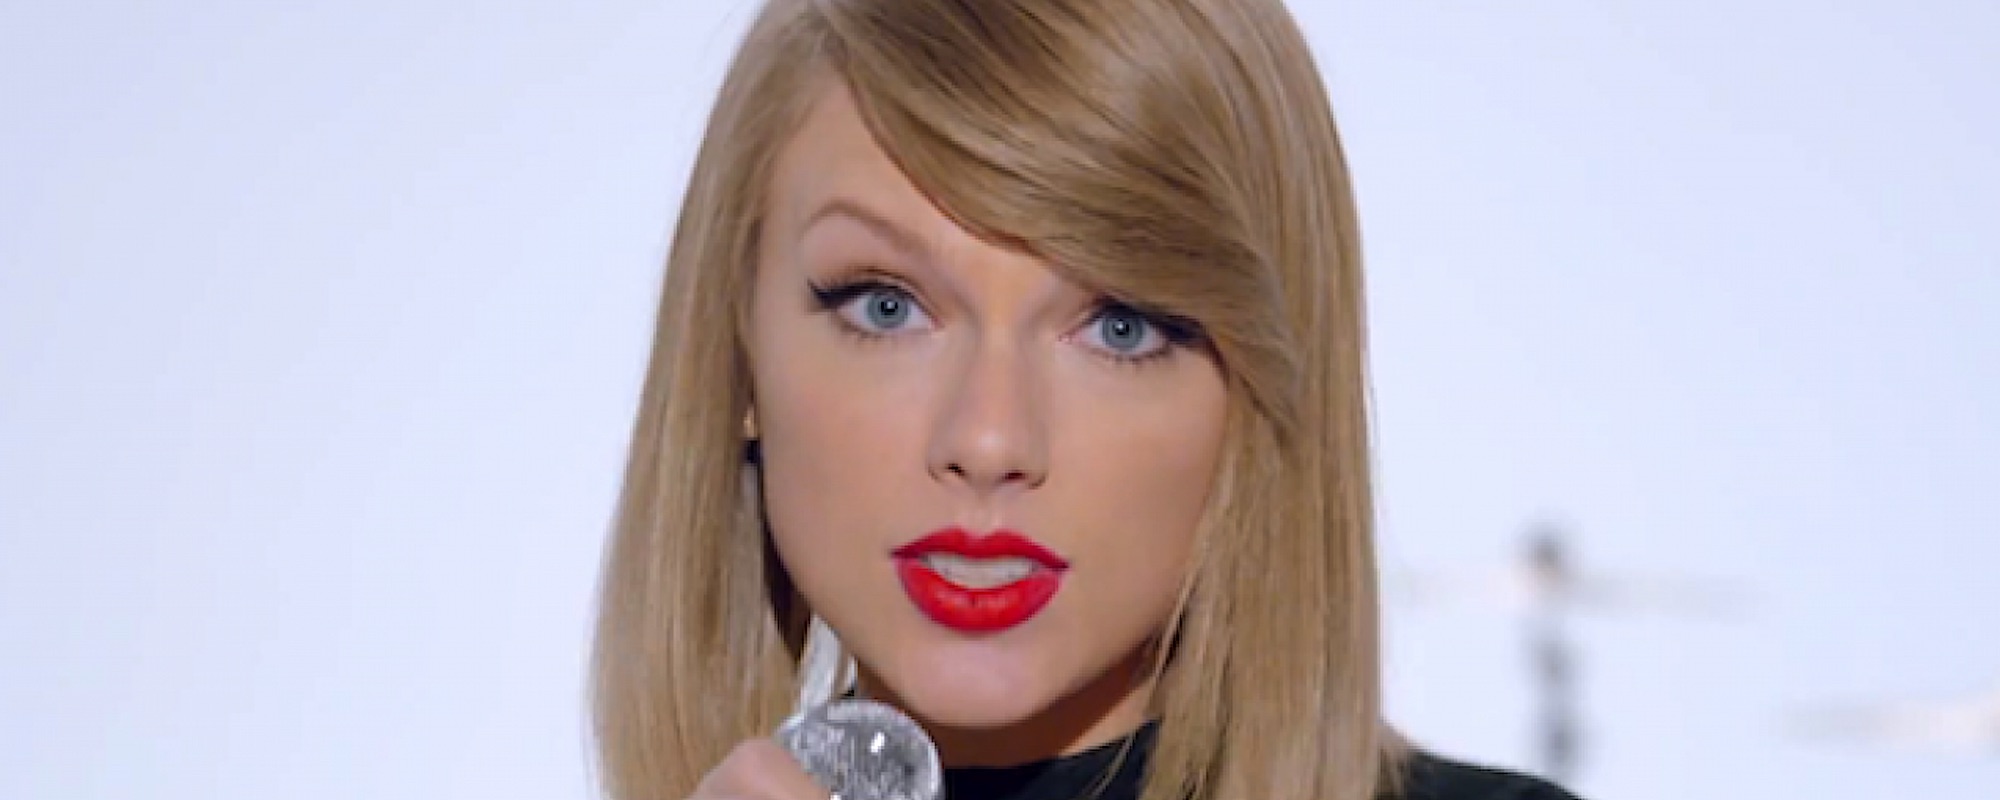 Taylor Swift Copyright Lawsuit May Go to Trial